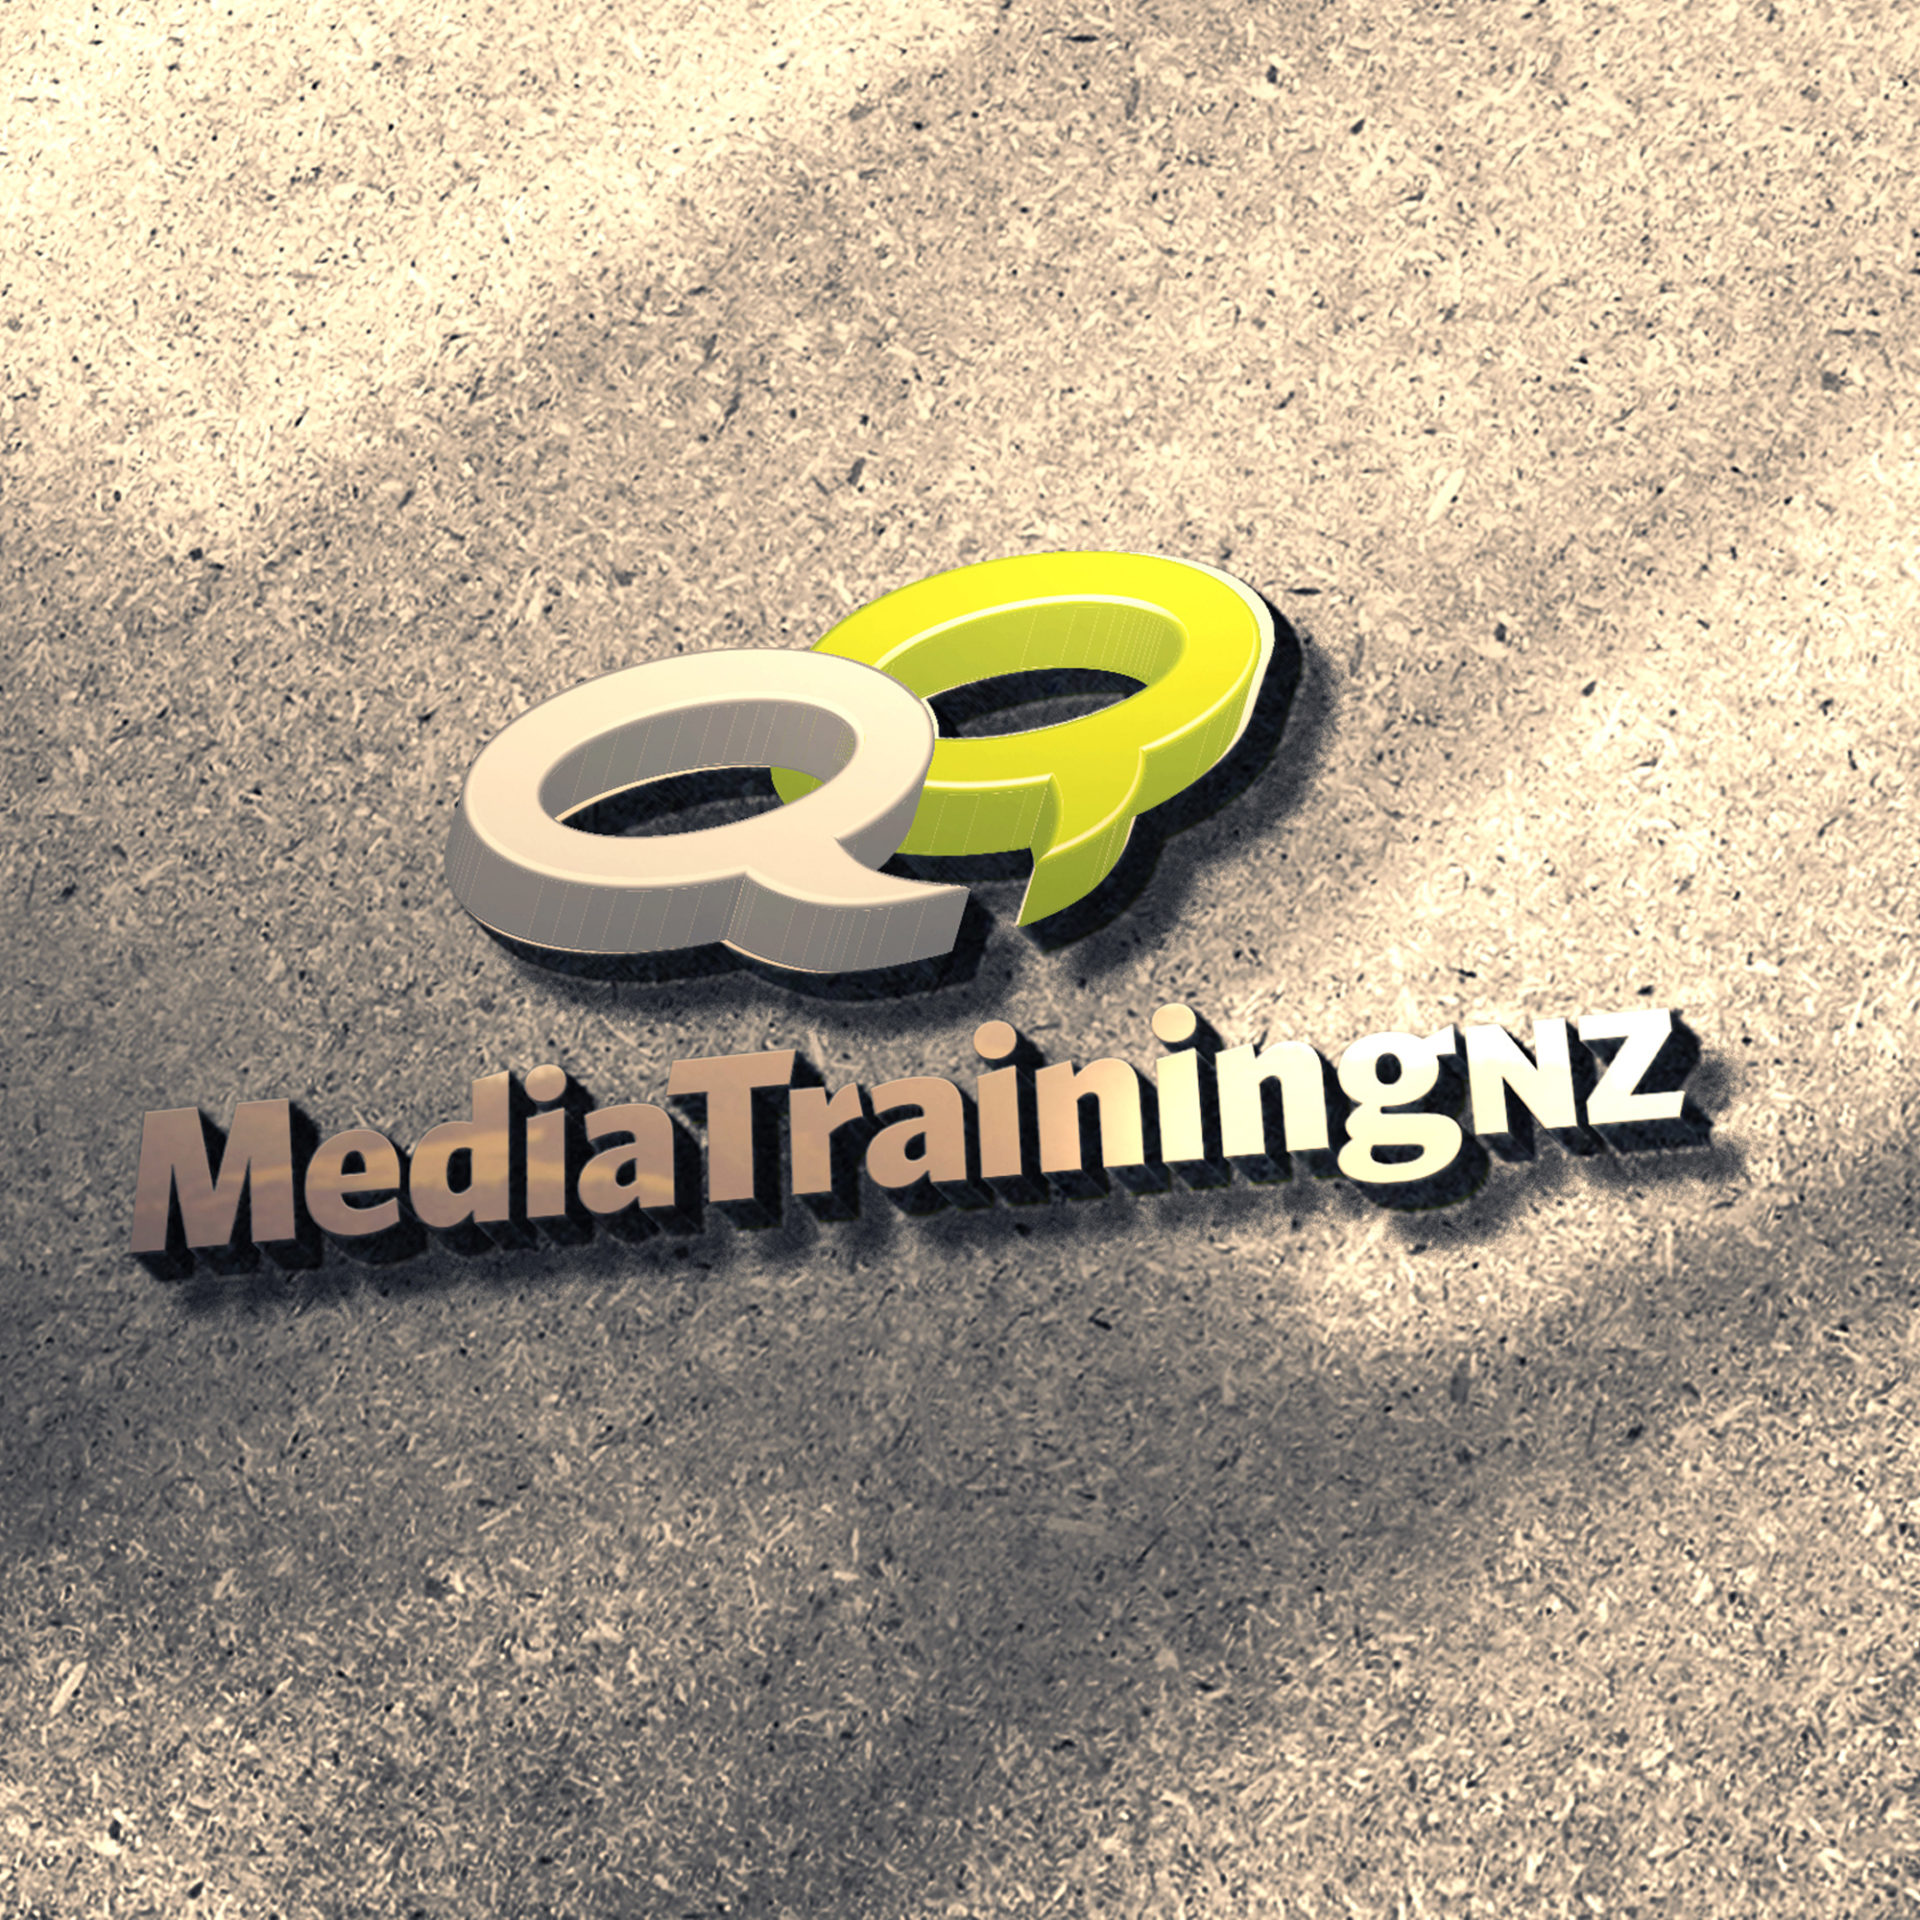 Local Christchurch Media & PR Training Logo Designer XDC.NZ specialises in Branding, Graphic Design for Business Cards, Signage, Websites & SEO & boosting your Google Search Engine Page 1 Rankings higher with creative website marketing